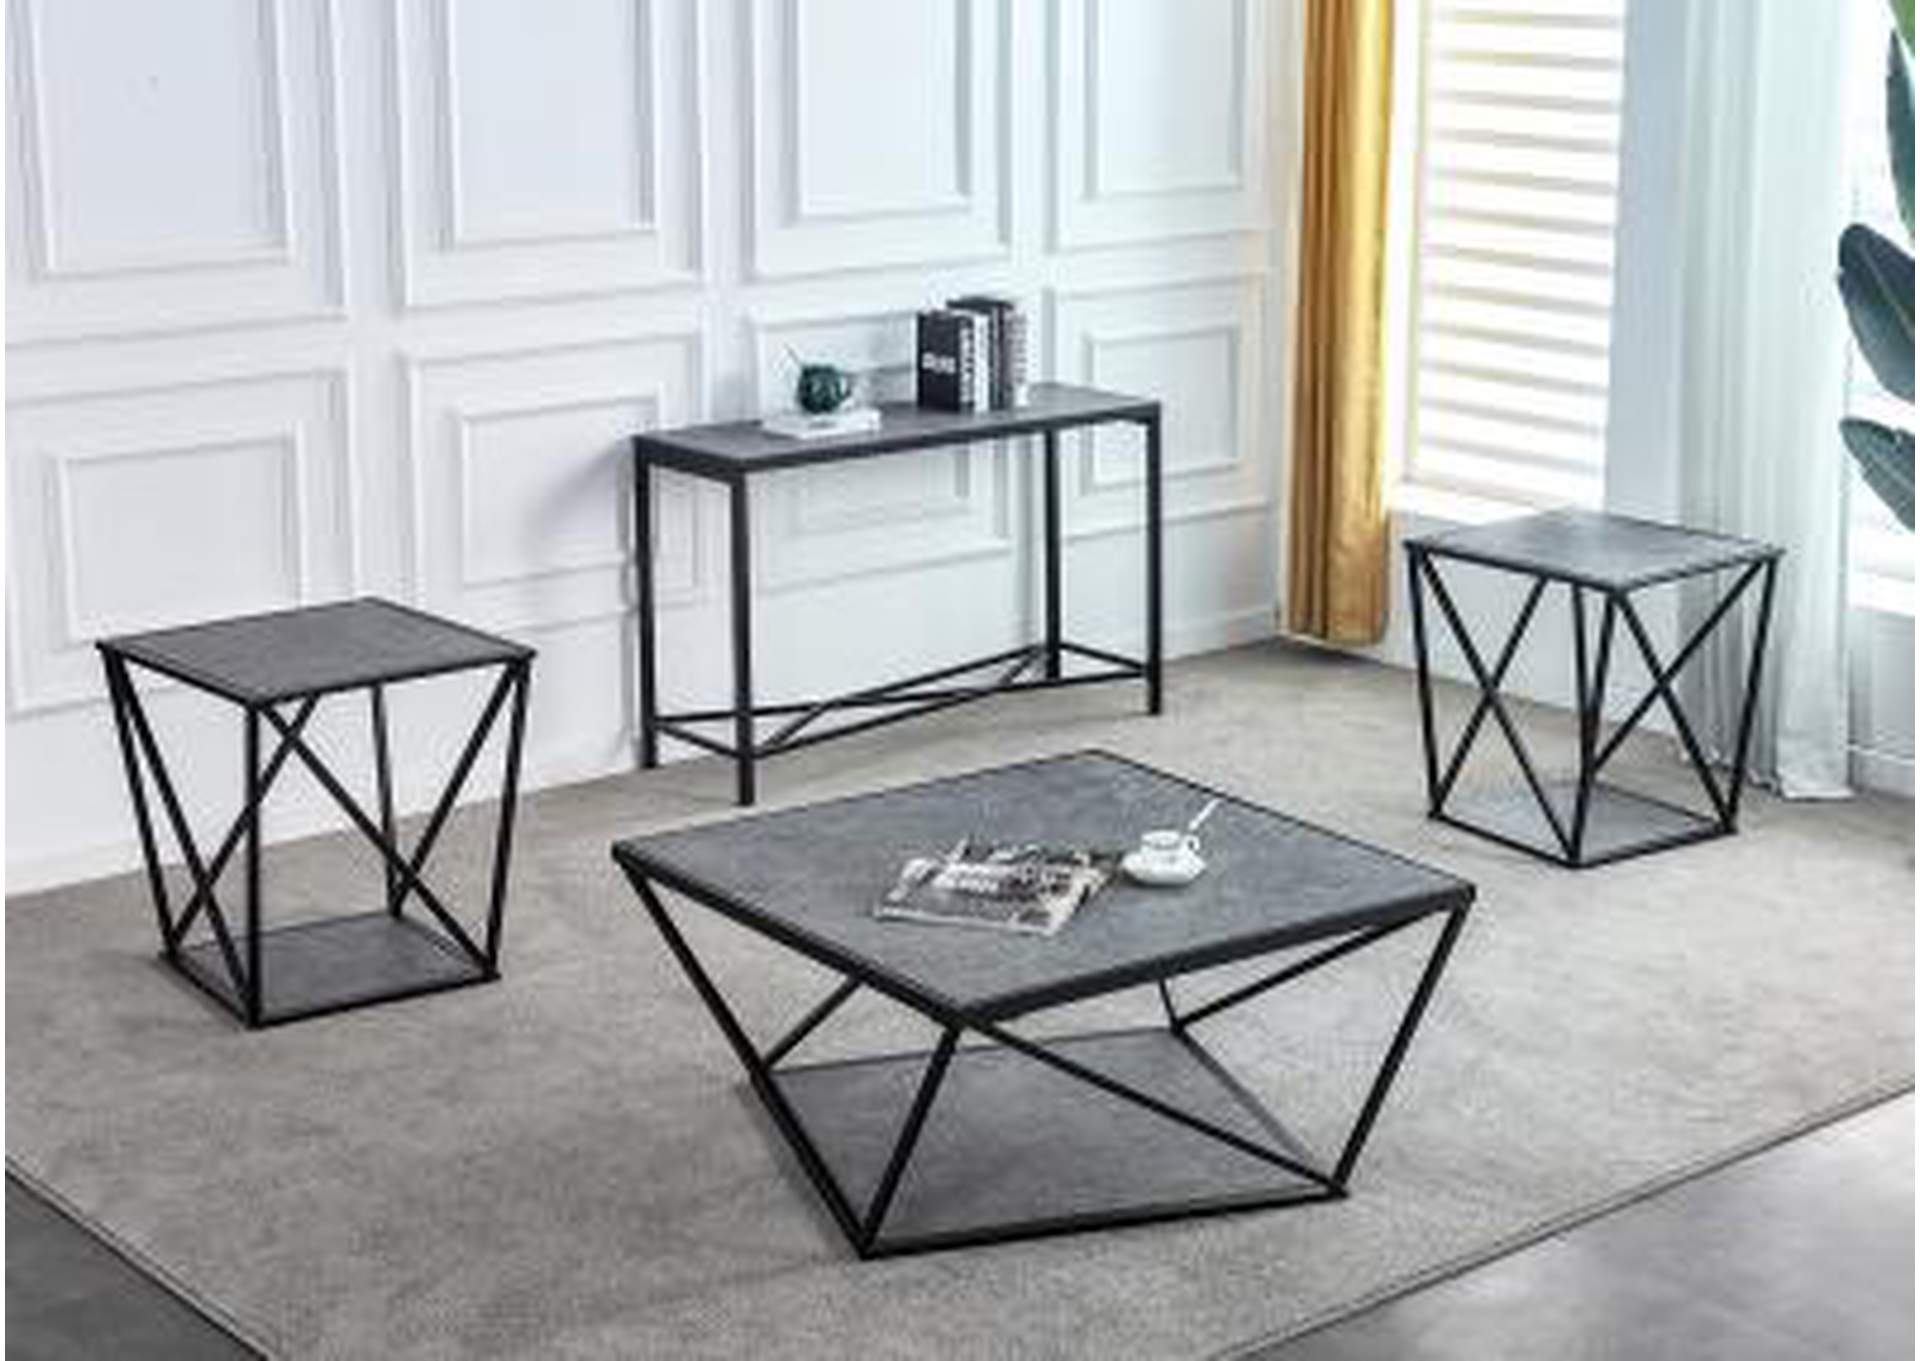 T125 Sofa Table,Nationwide